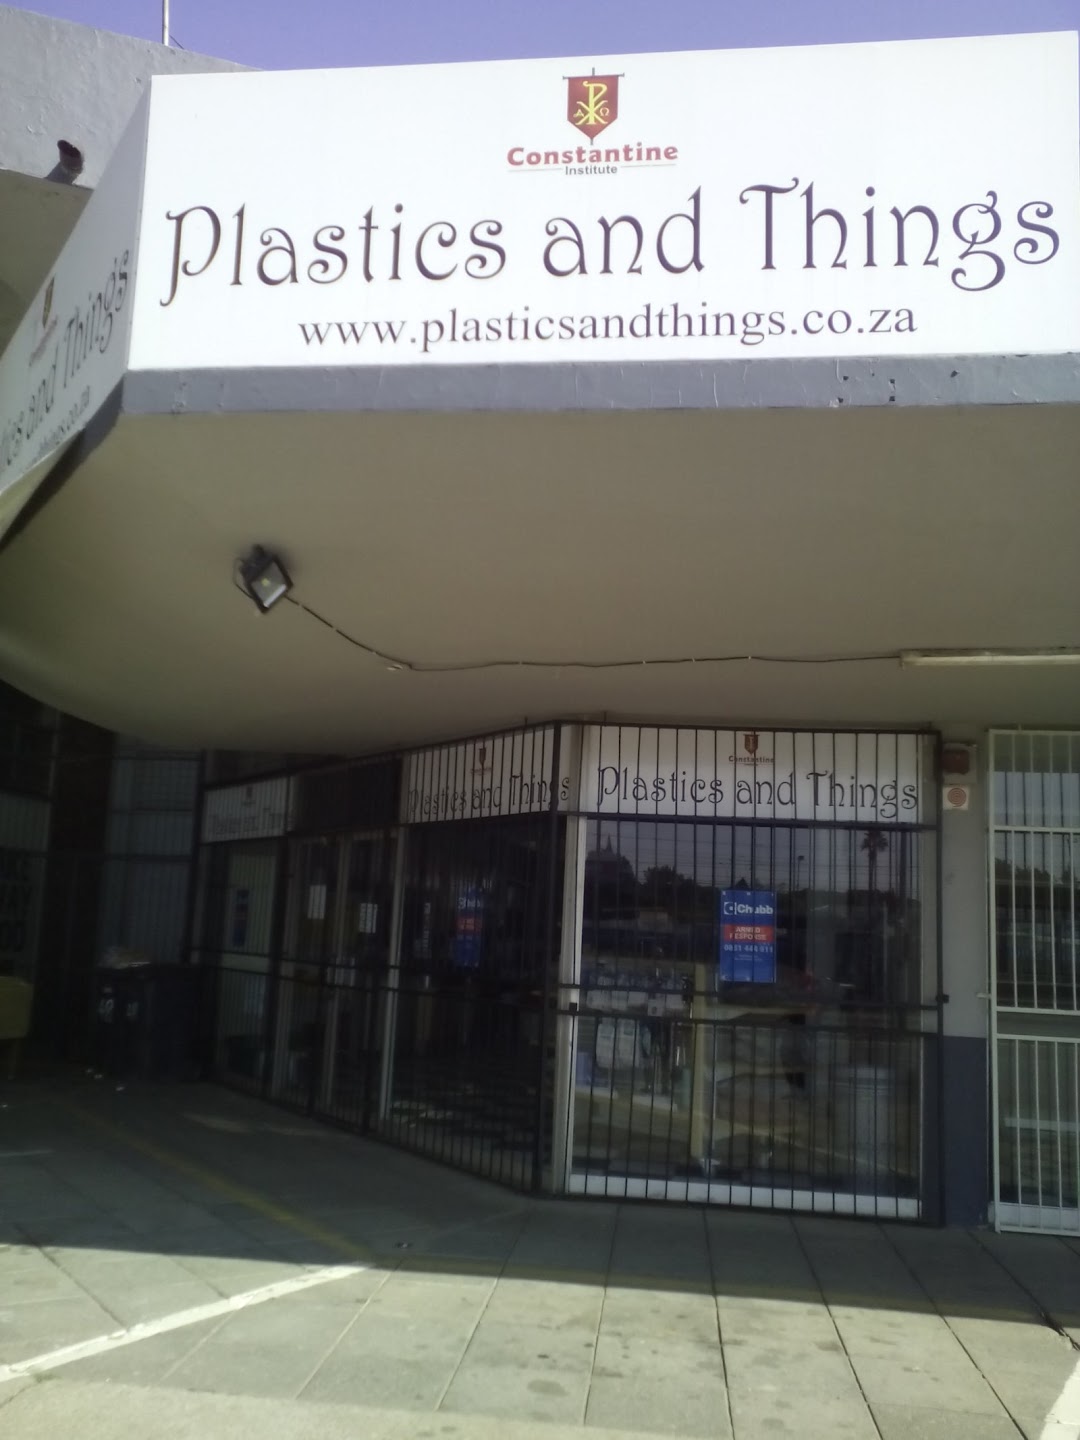 Plastics and Things